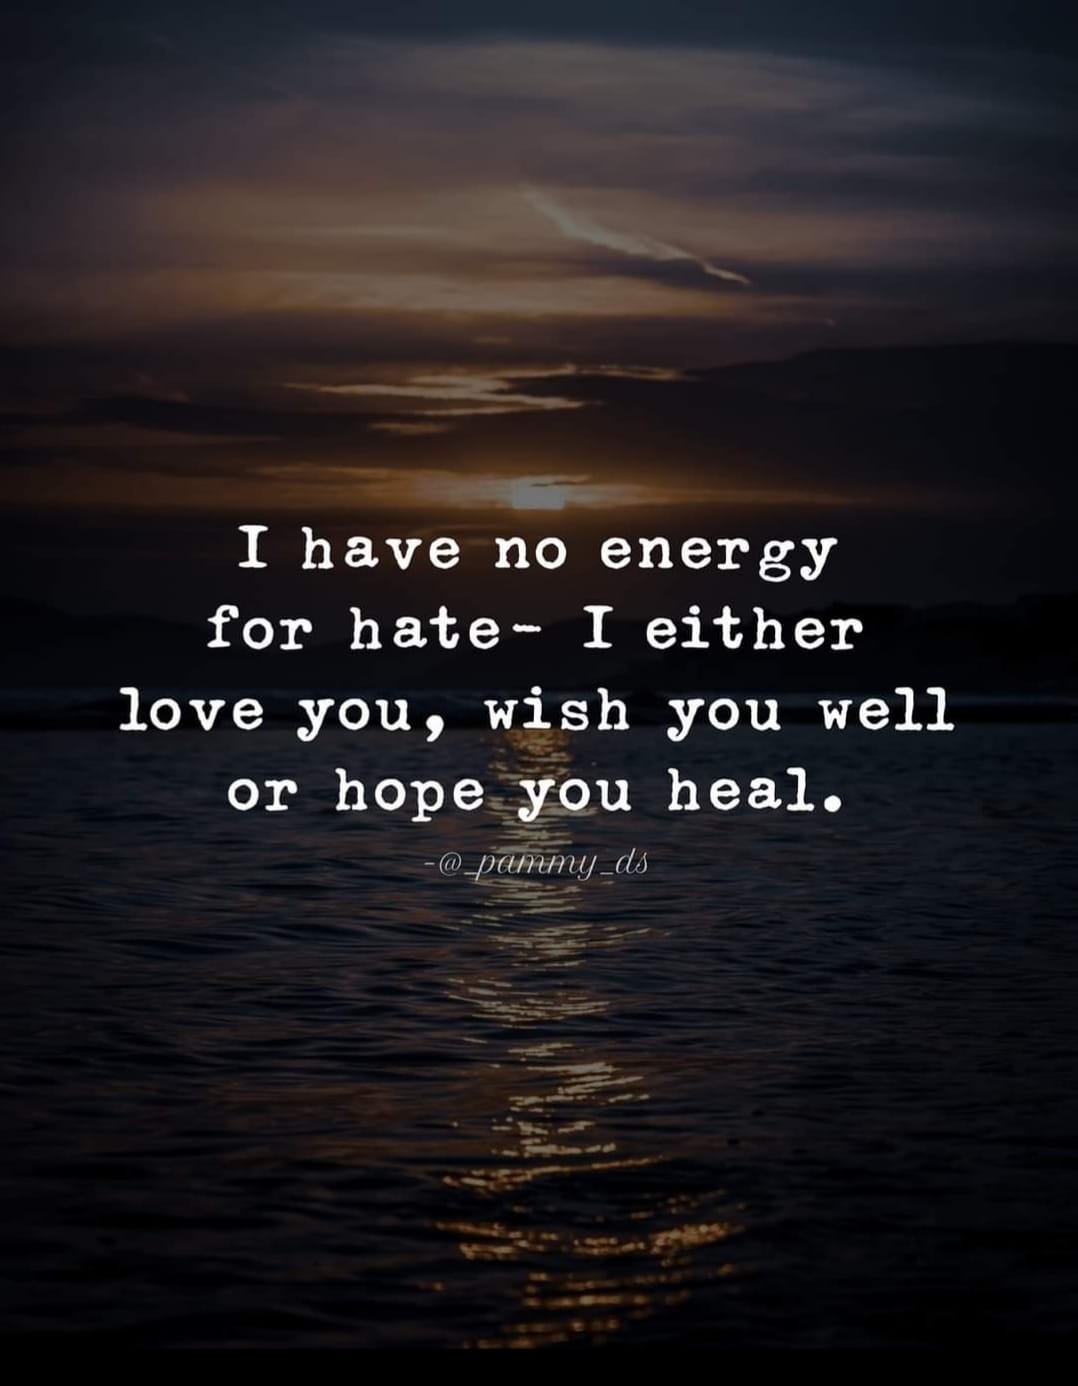 i have no energy for hate, i either love you, wish you well or hope you heal, motivational quote